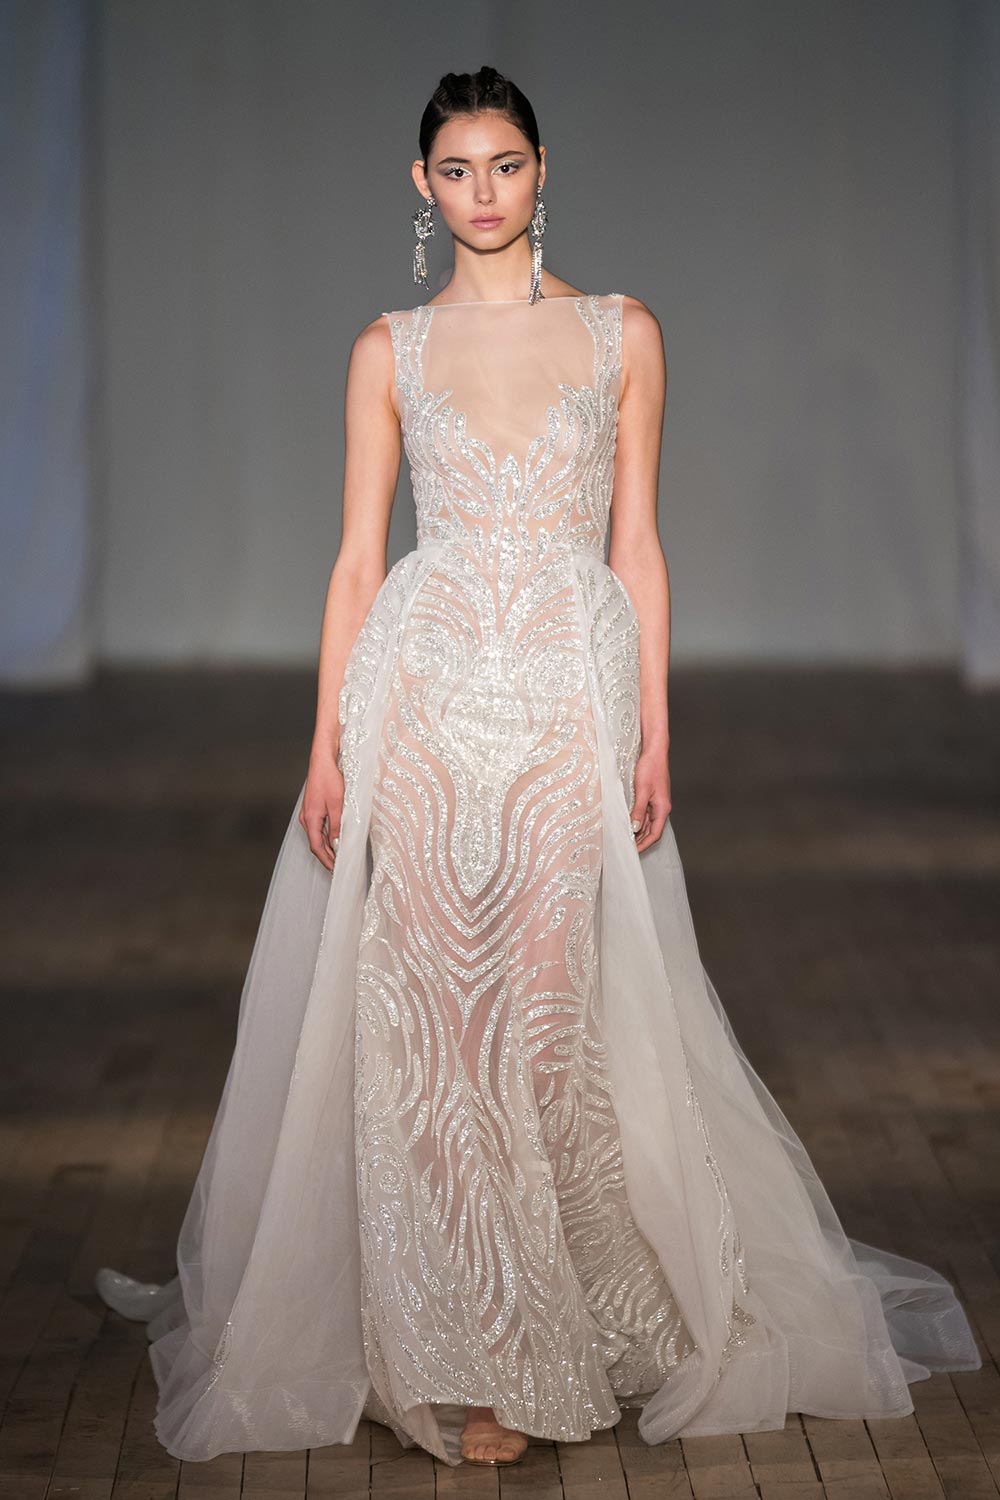 Sheer Perfection: BERTA's 2019 'City of Angels' Wedding Dress Collection